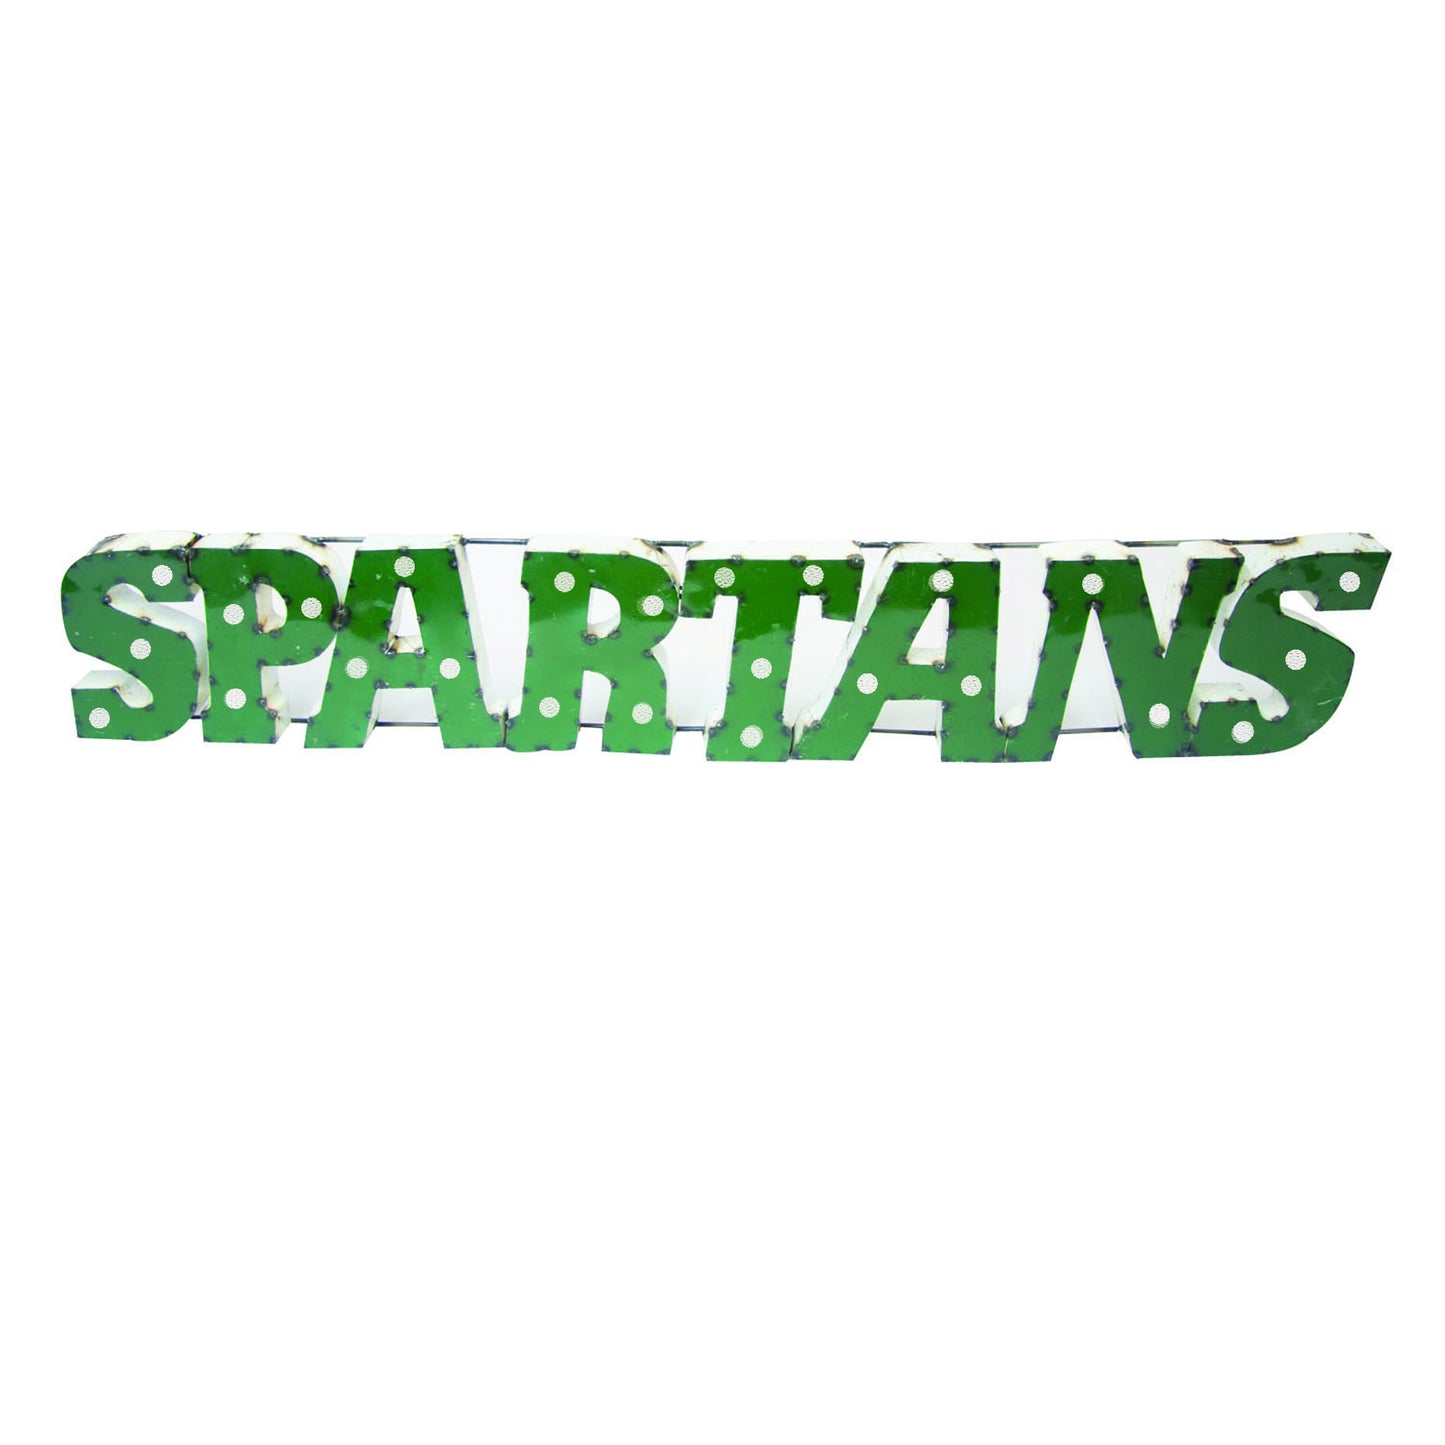 Michigan State "Spartans" Lighted Recycled Wall Decor